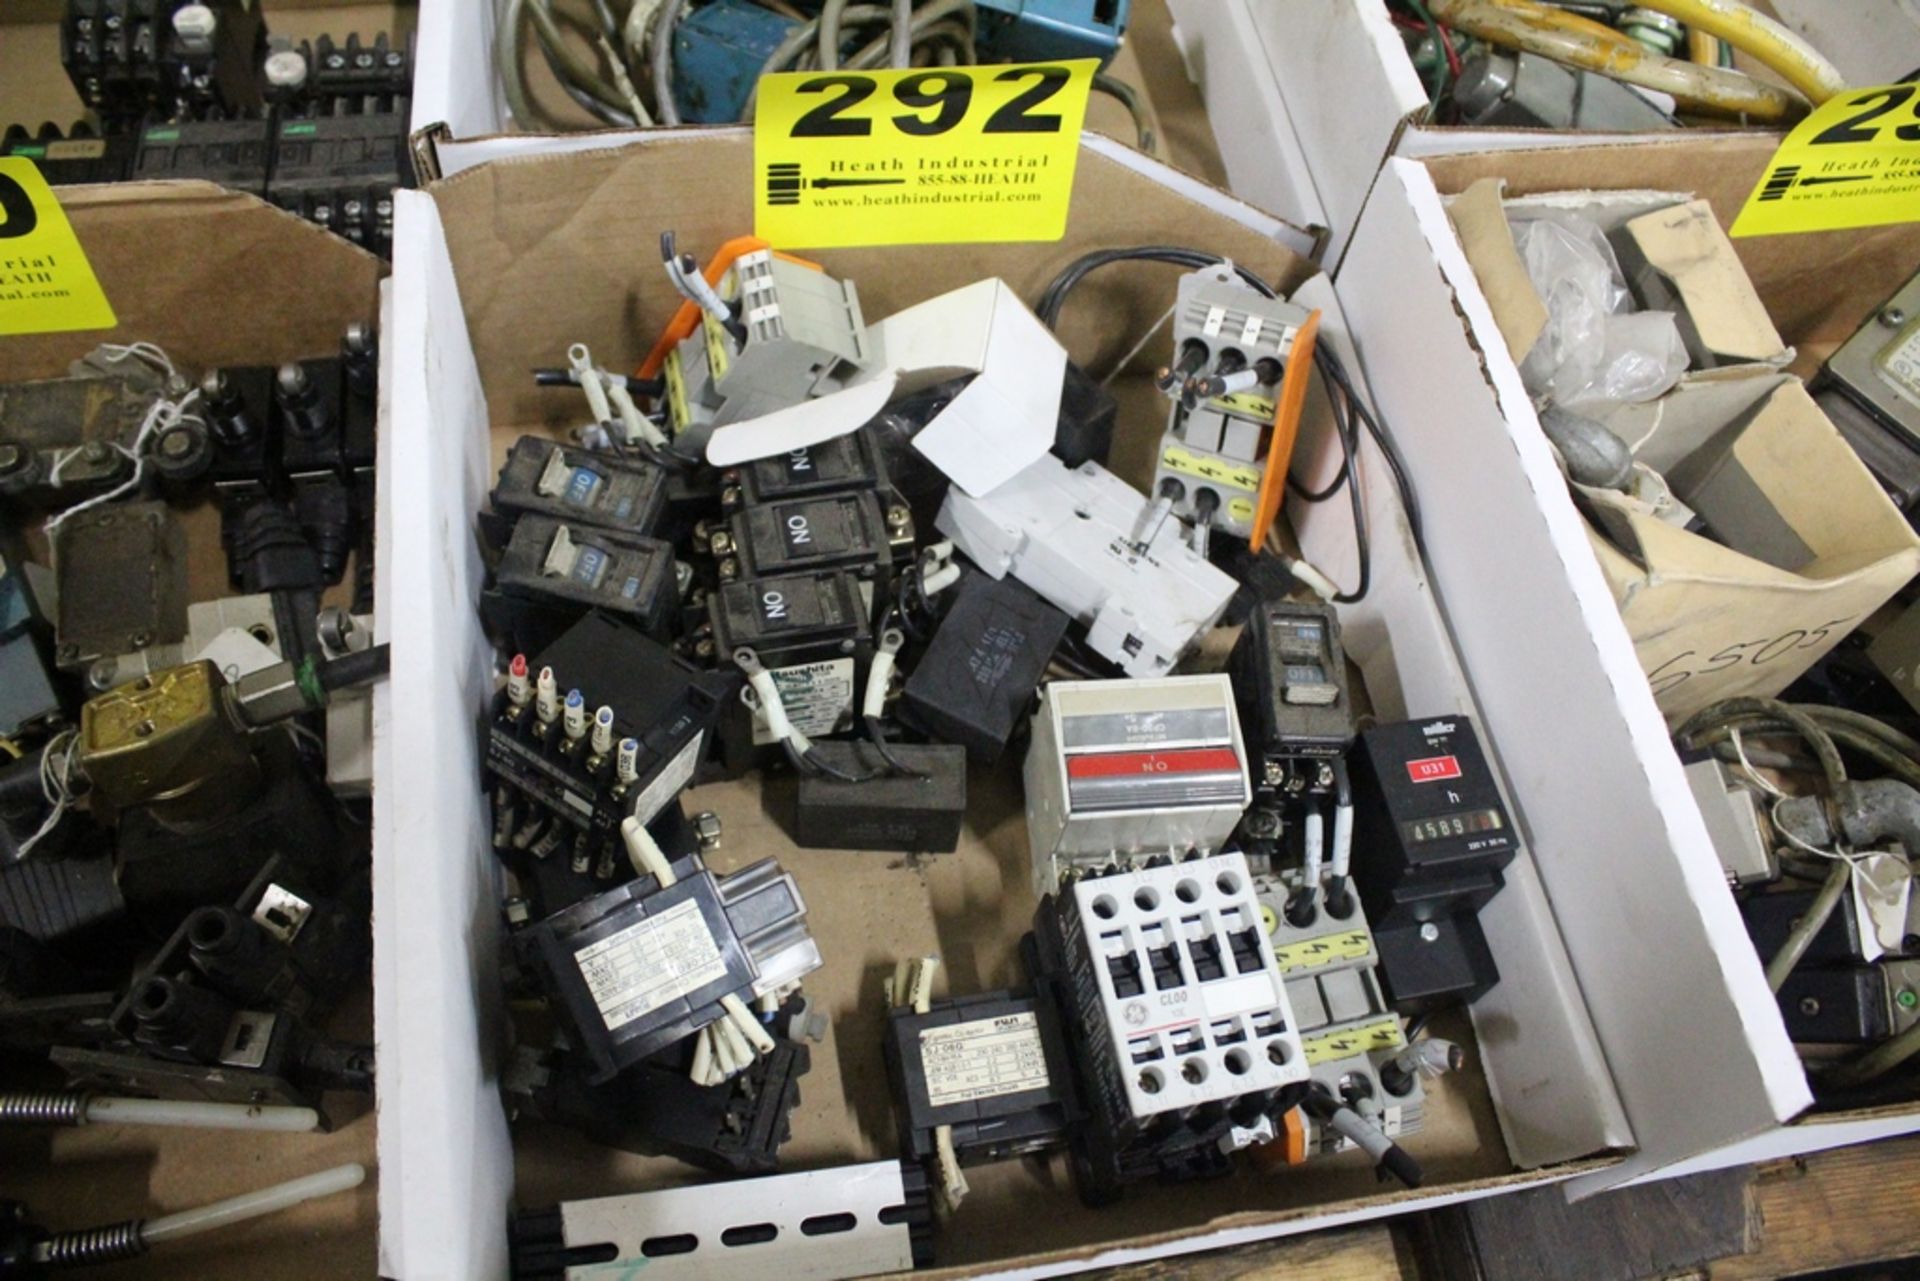 LOT: LARGE QTY OF CONTACTORS,BREAKERS, ETC. IN BOX